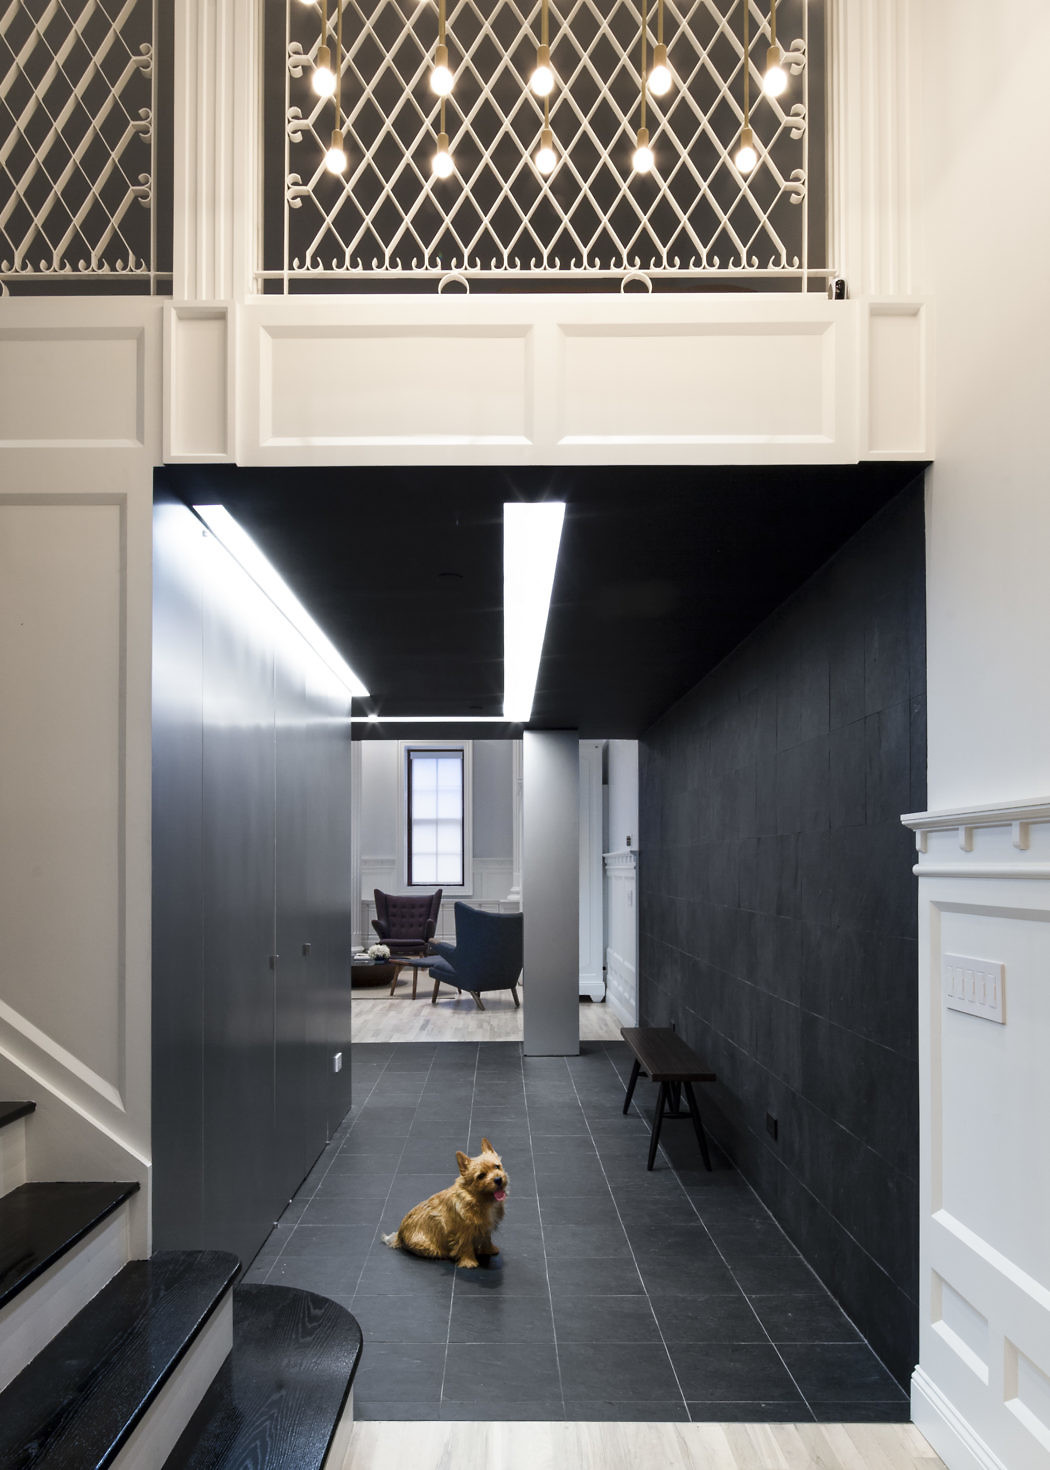 Modern hallway with contrasting walls and a dog sitting on the floor.